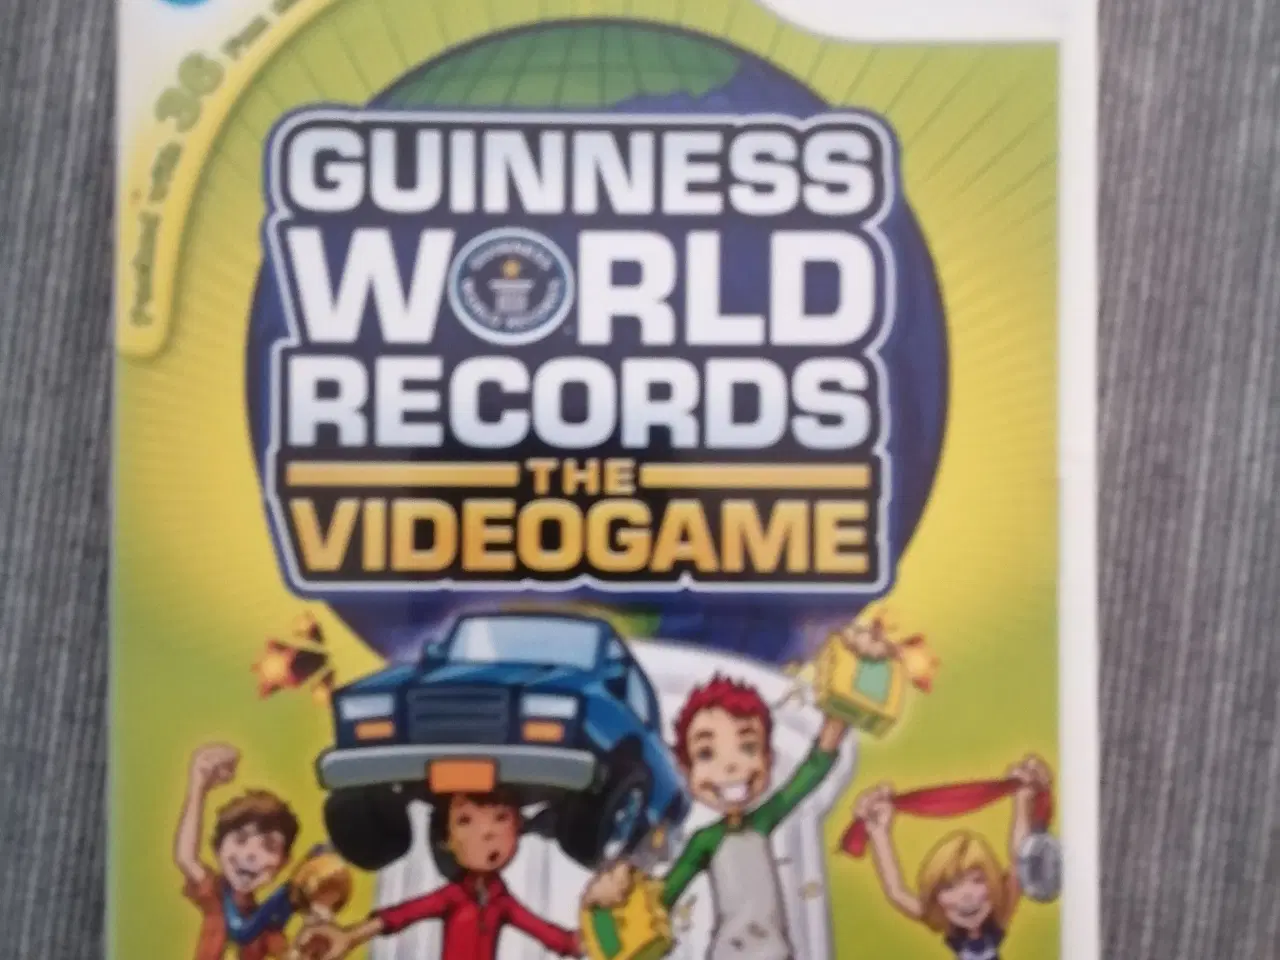 Billede 1 - Guiness World Records the video game